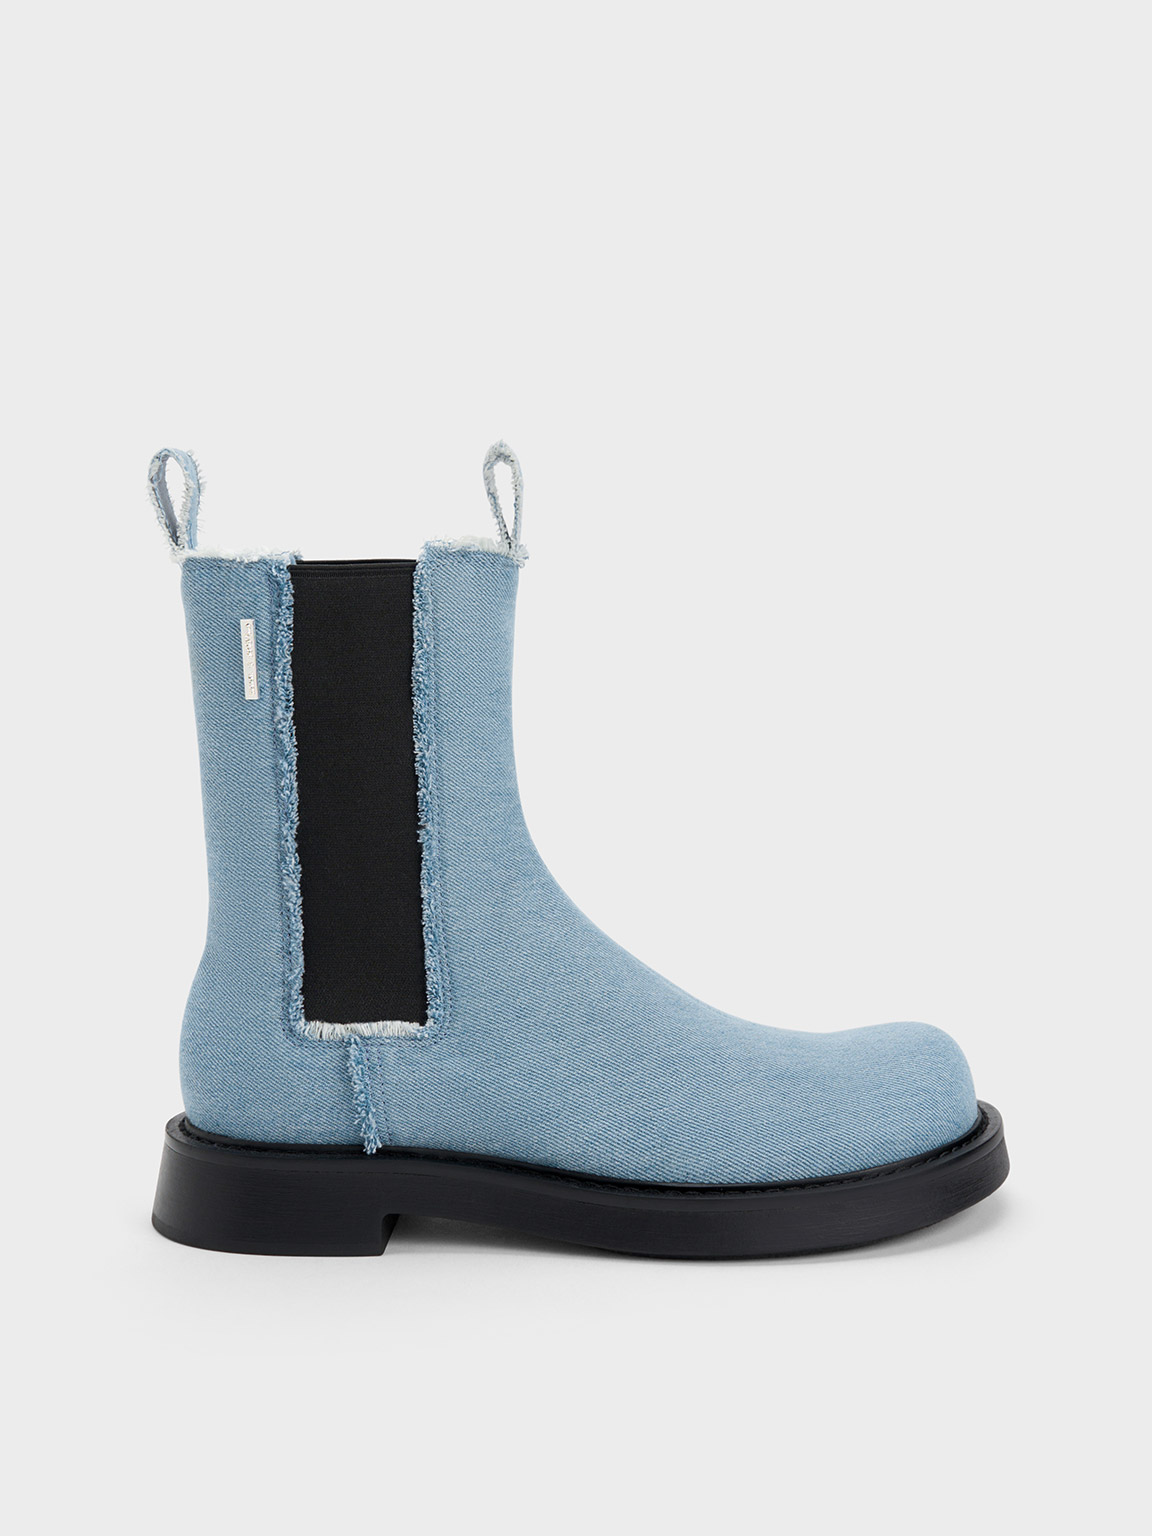 Charles & Keith Bryn Denim Chelsea Boots In Light Blue